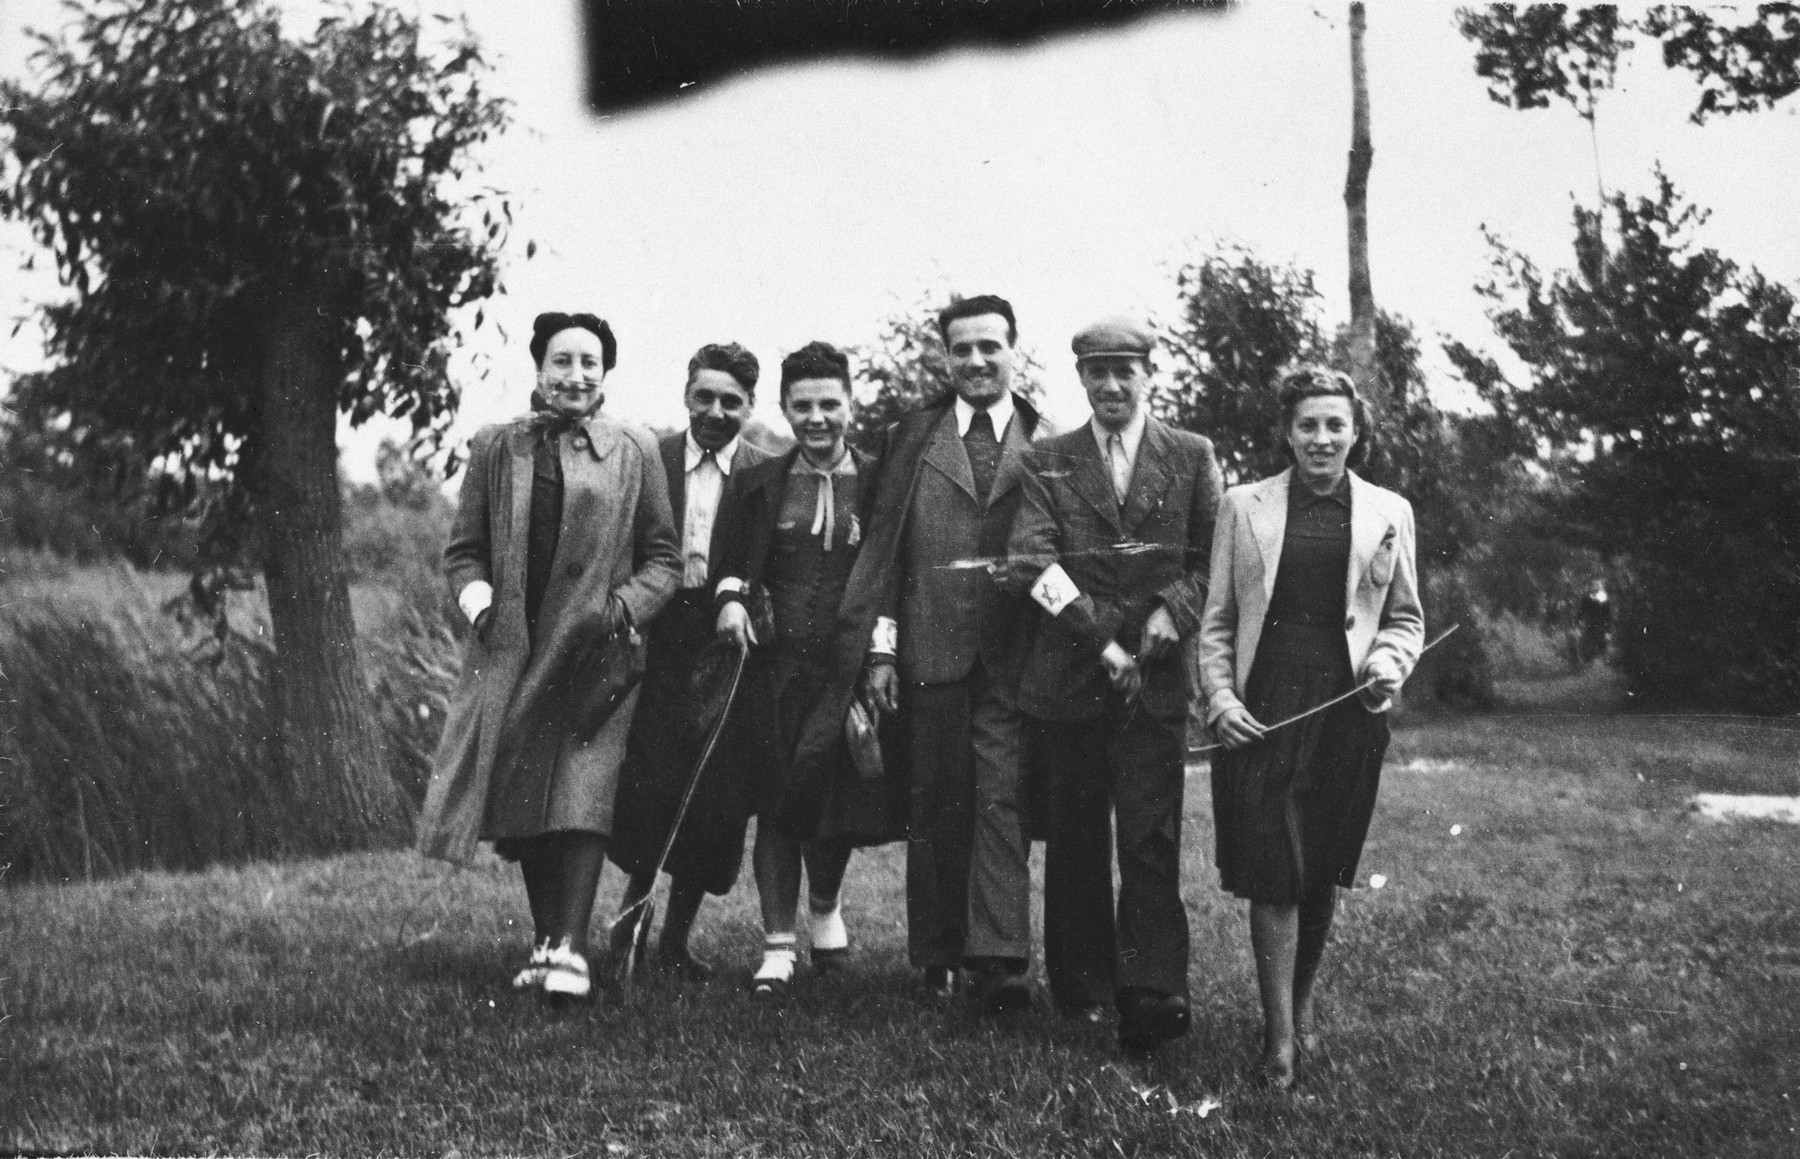 Members of the Jewish Council in Chmielnik journey to Wislica to attend a meeting.

Bluma Kleinhandler is pictured third from the right.